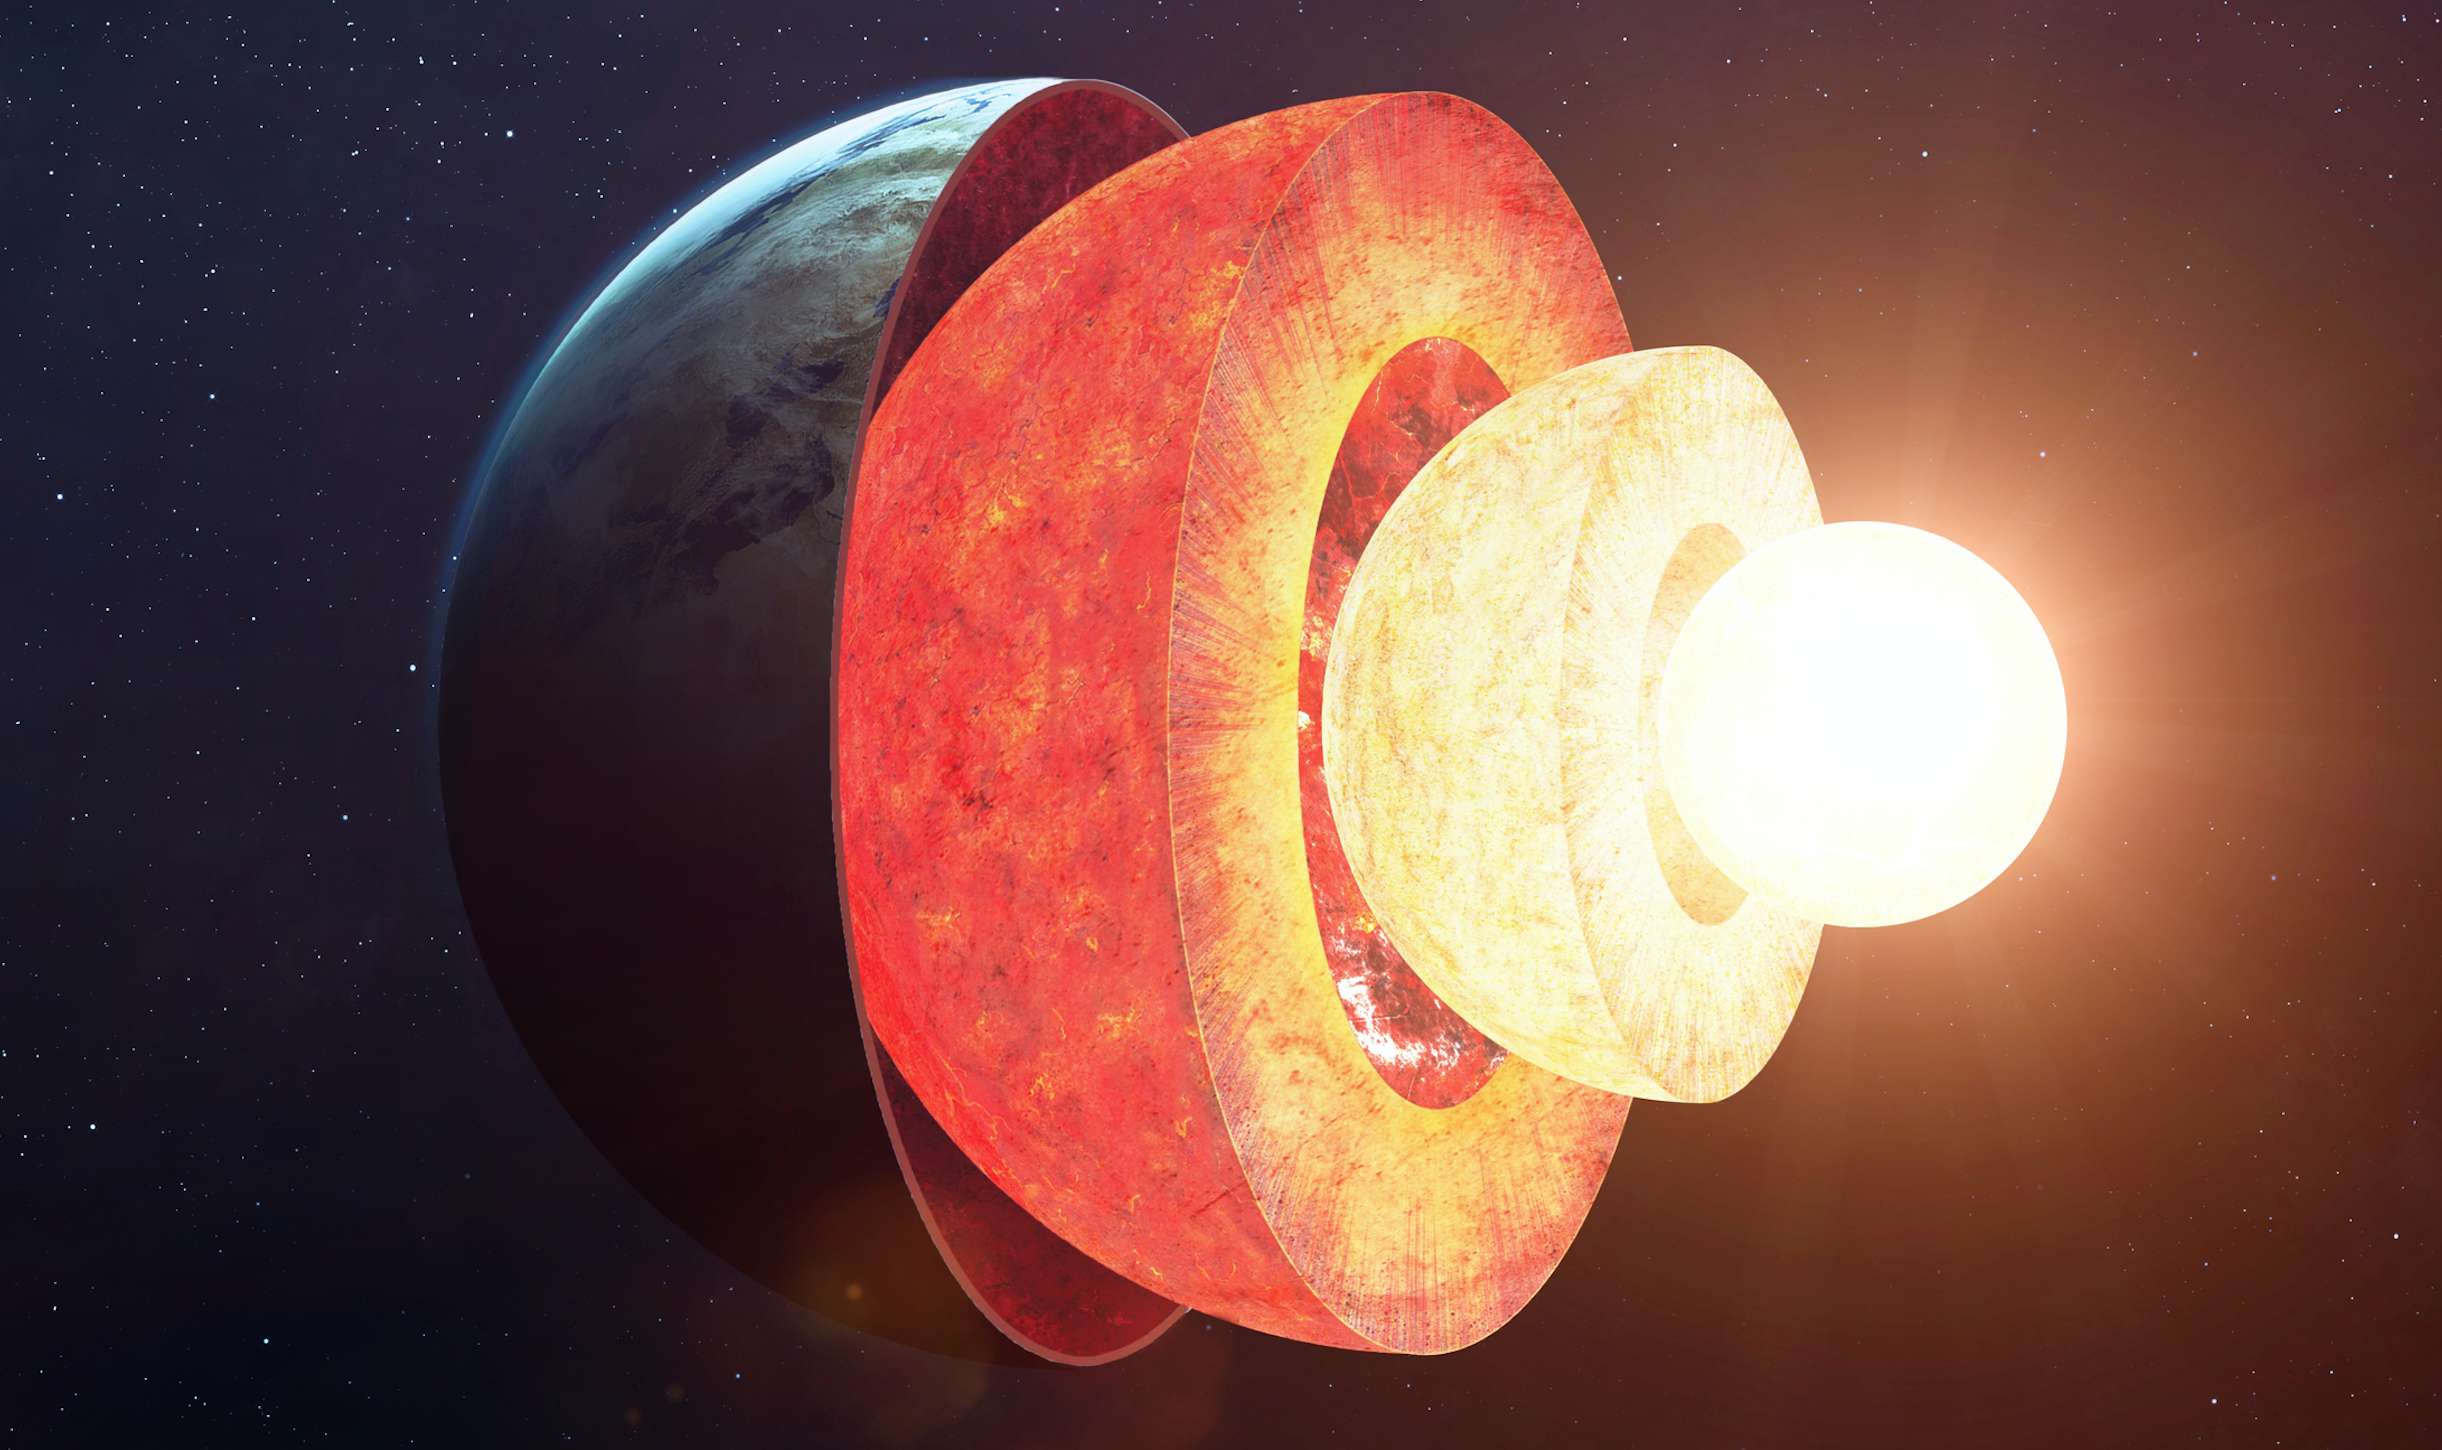 Earth’s core is speeding up and slowing down